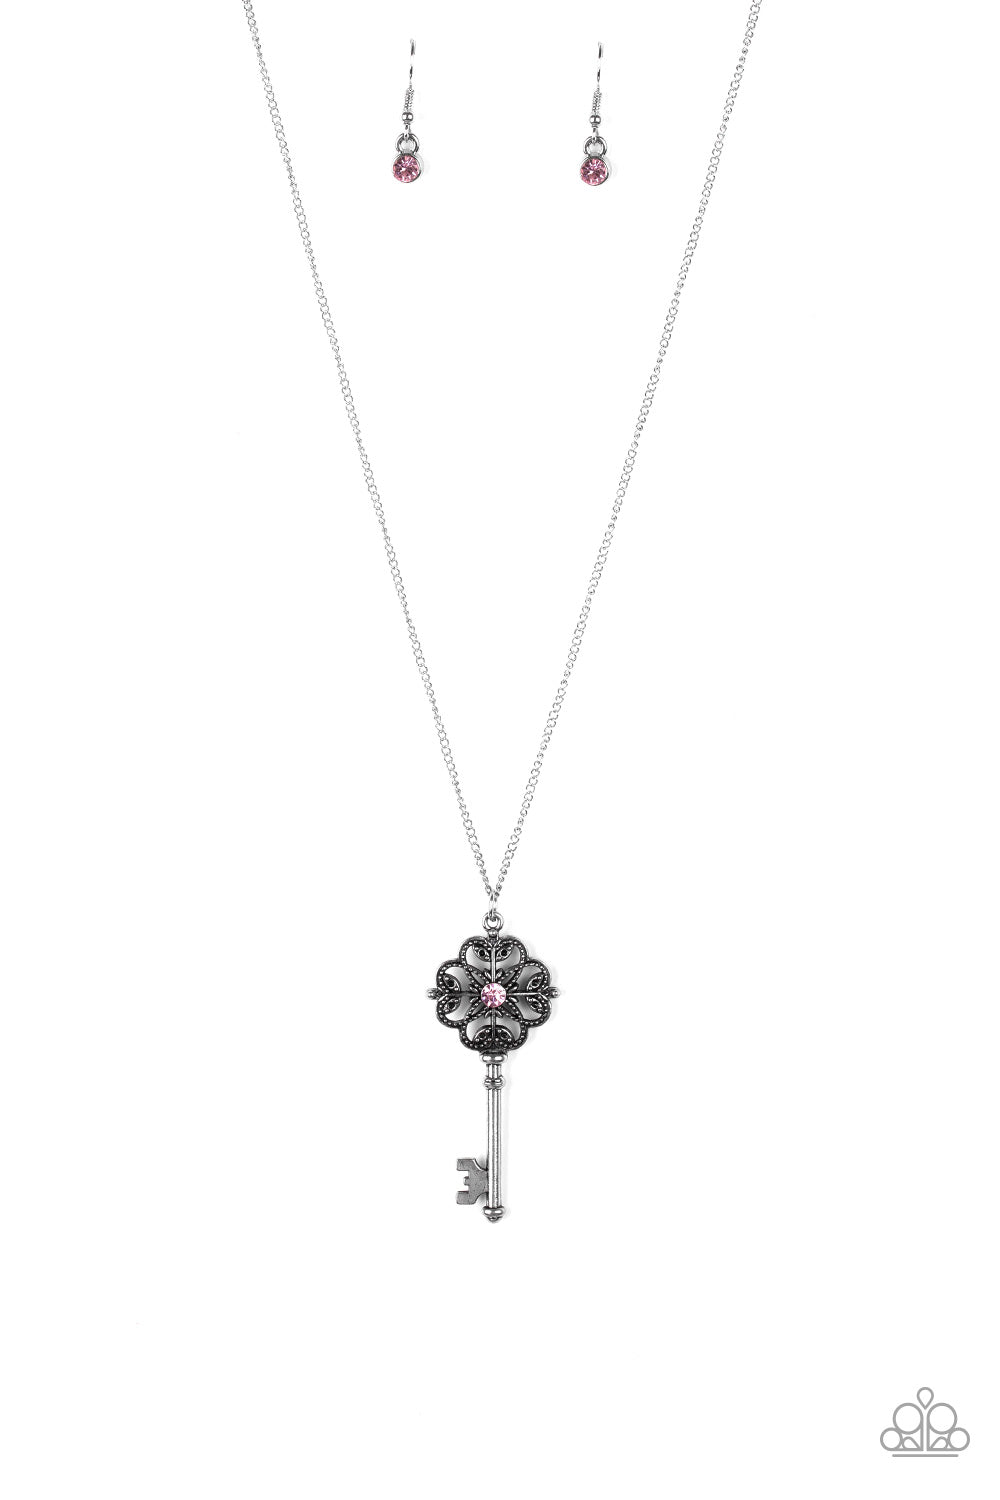 Paparazzi Accessories - Got It On Lock - Pink & Silver Necklace